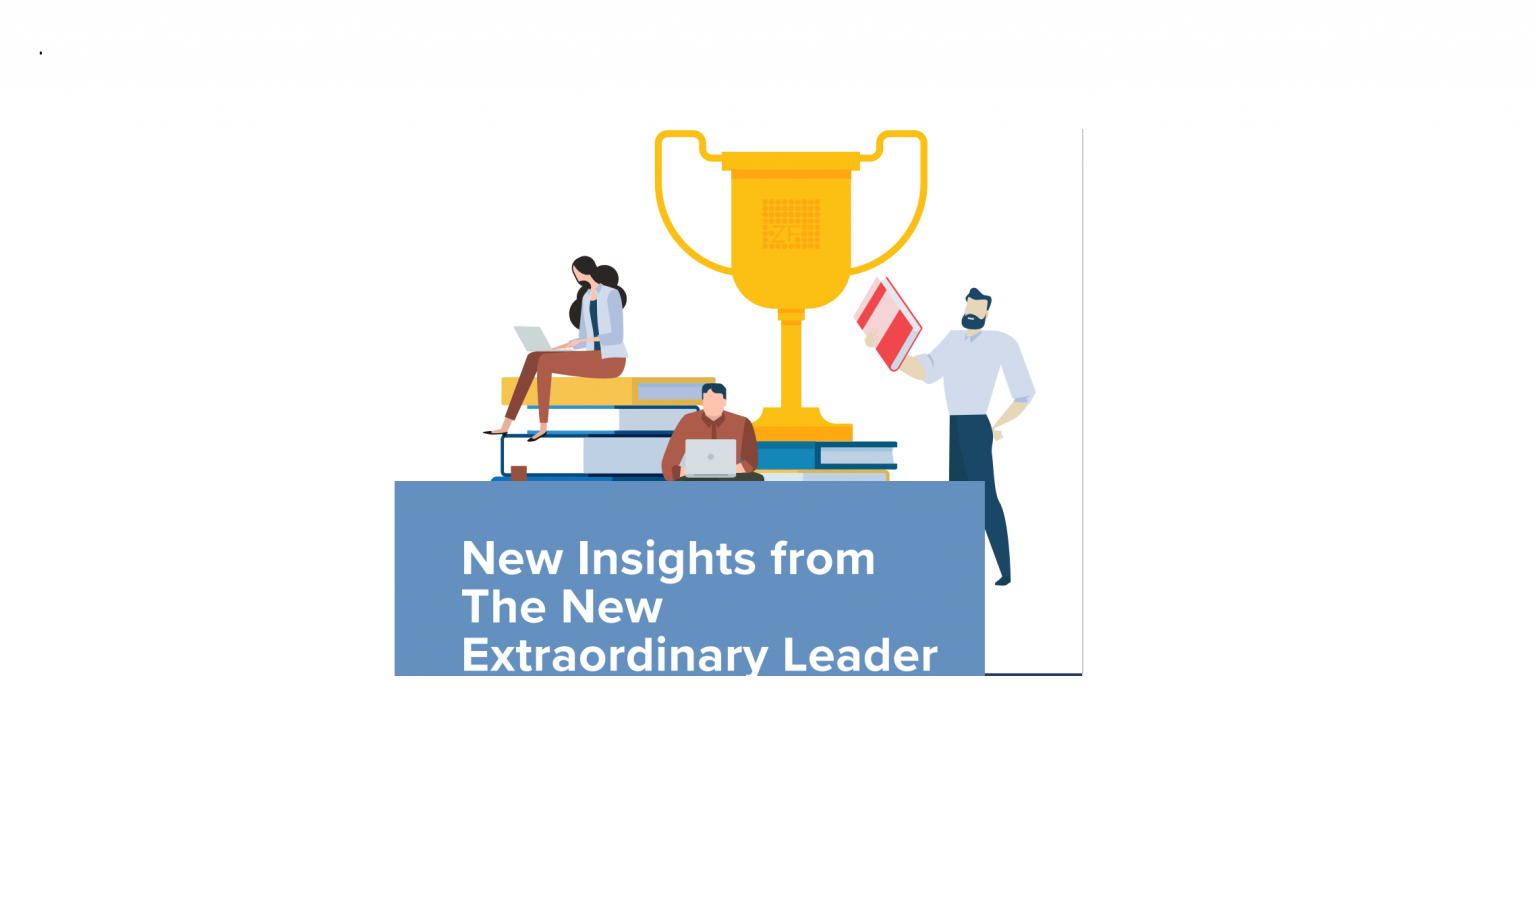 New Insights from The New Extraordinary Leader